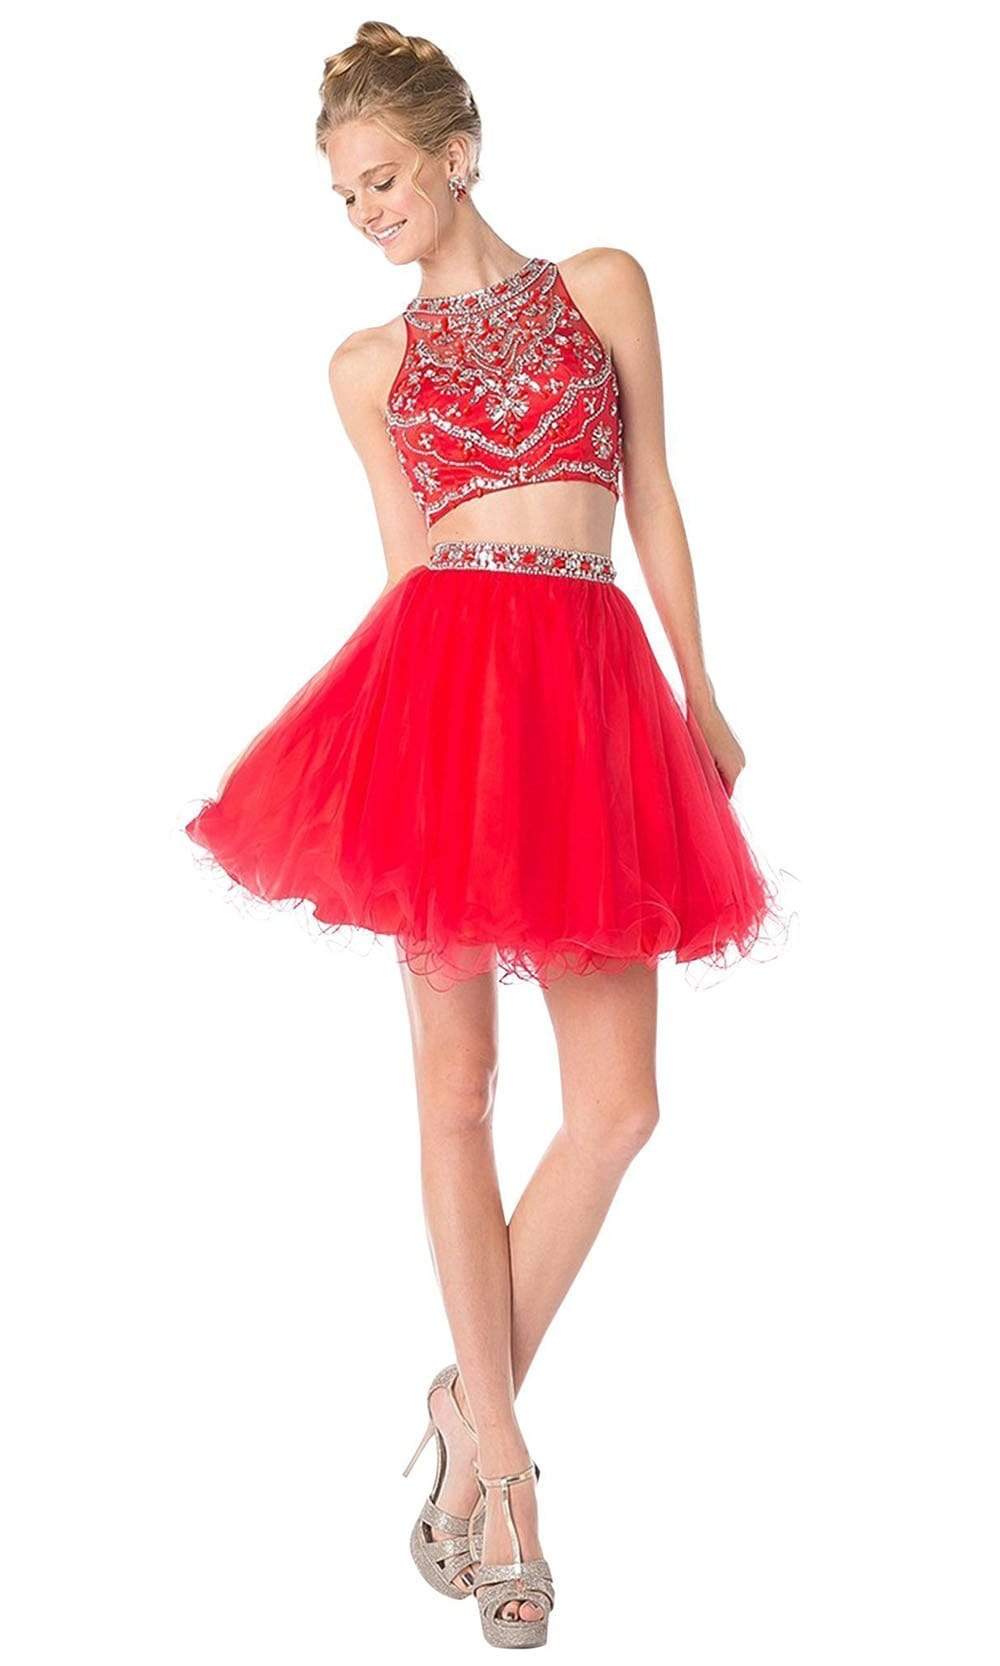 Cinderella Divine - Two-Piece Crystal Ornate Illusion A-Line Dress Special Occasion Dress 2 / Red